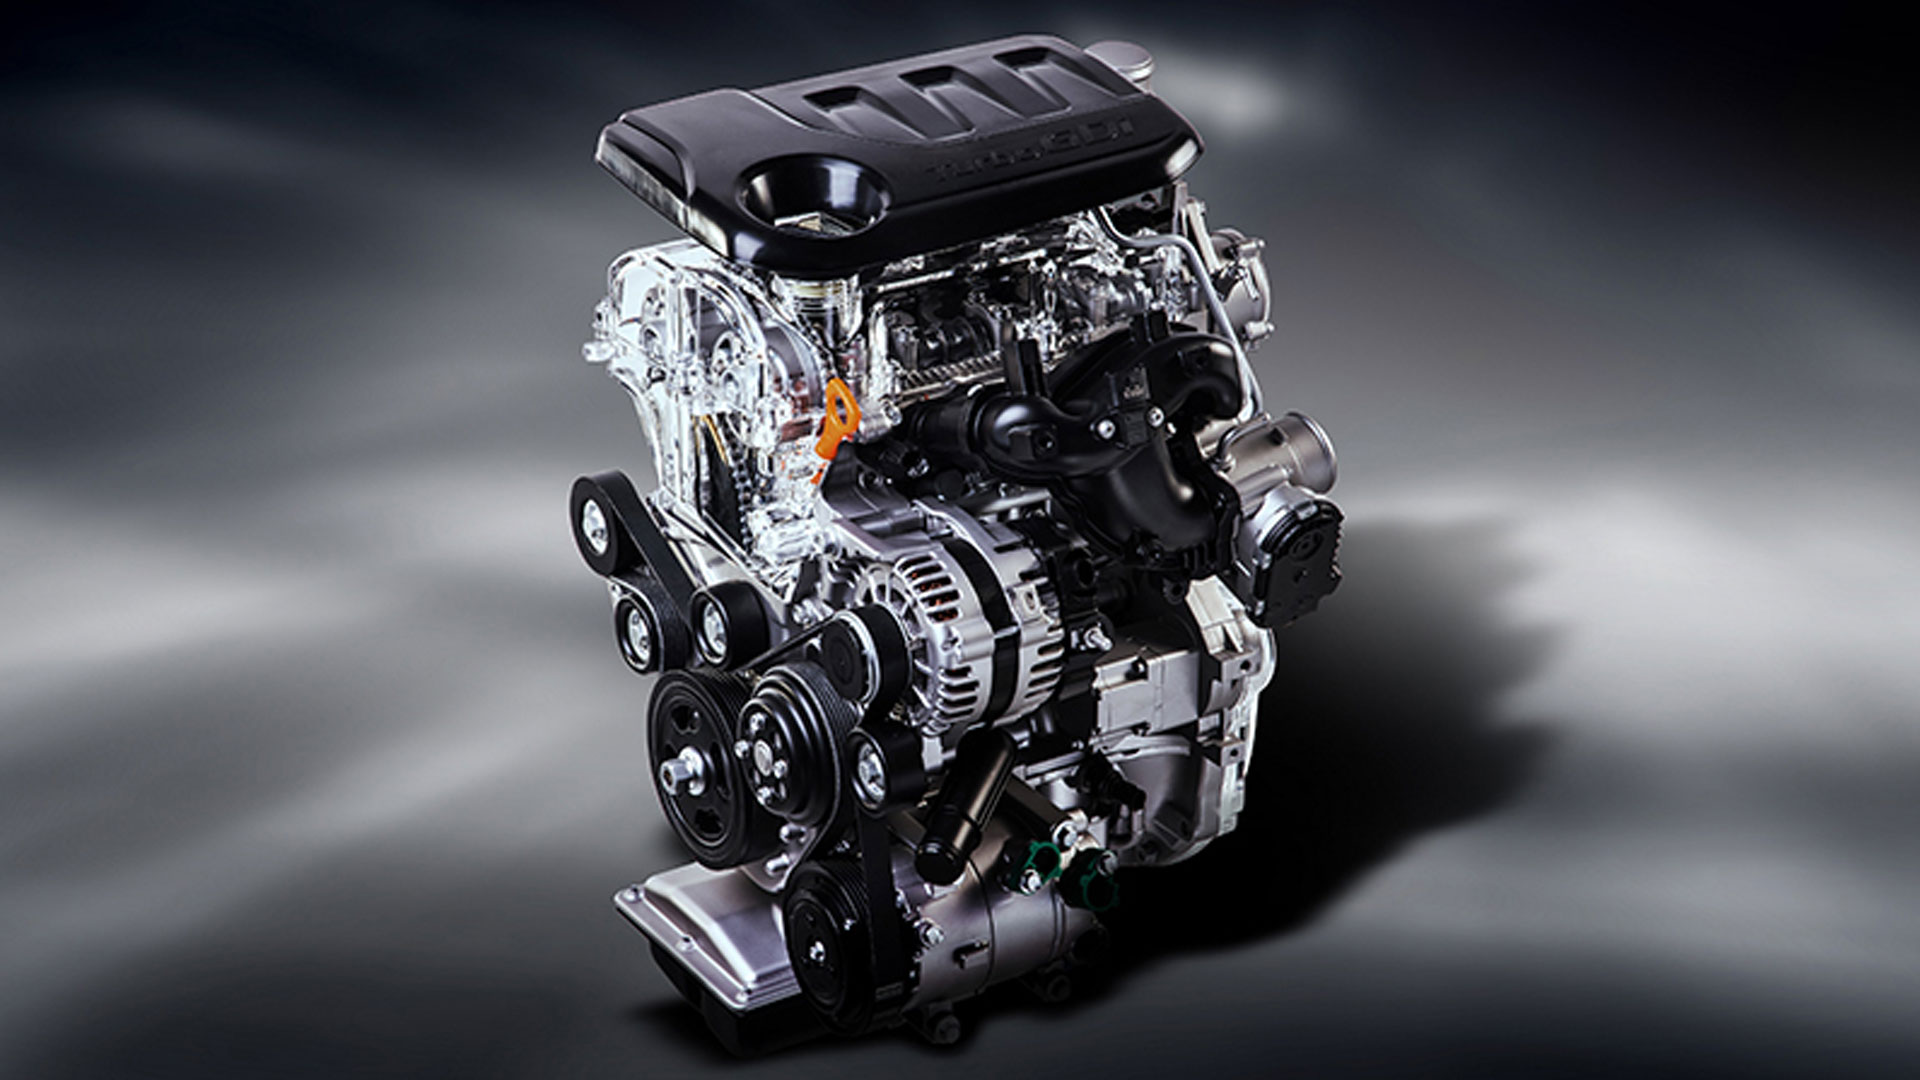 production premiere for Kia's new 1.0-litre turbocharged three-cylinder